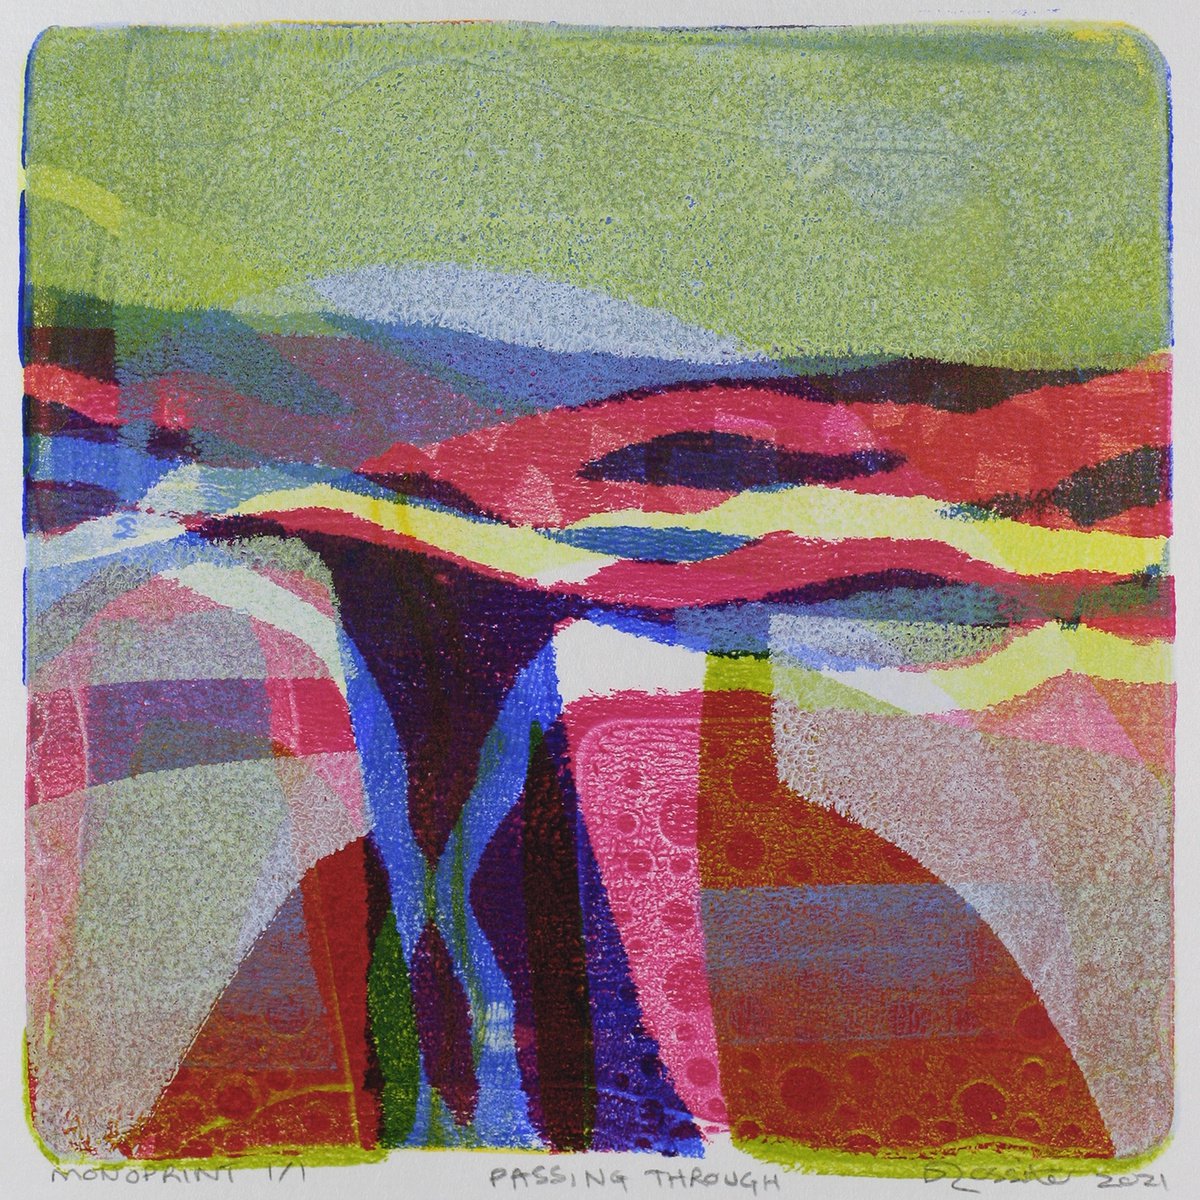 Passing Through - Unmounted Signed Monotype by Dawn Rossiter